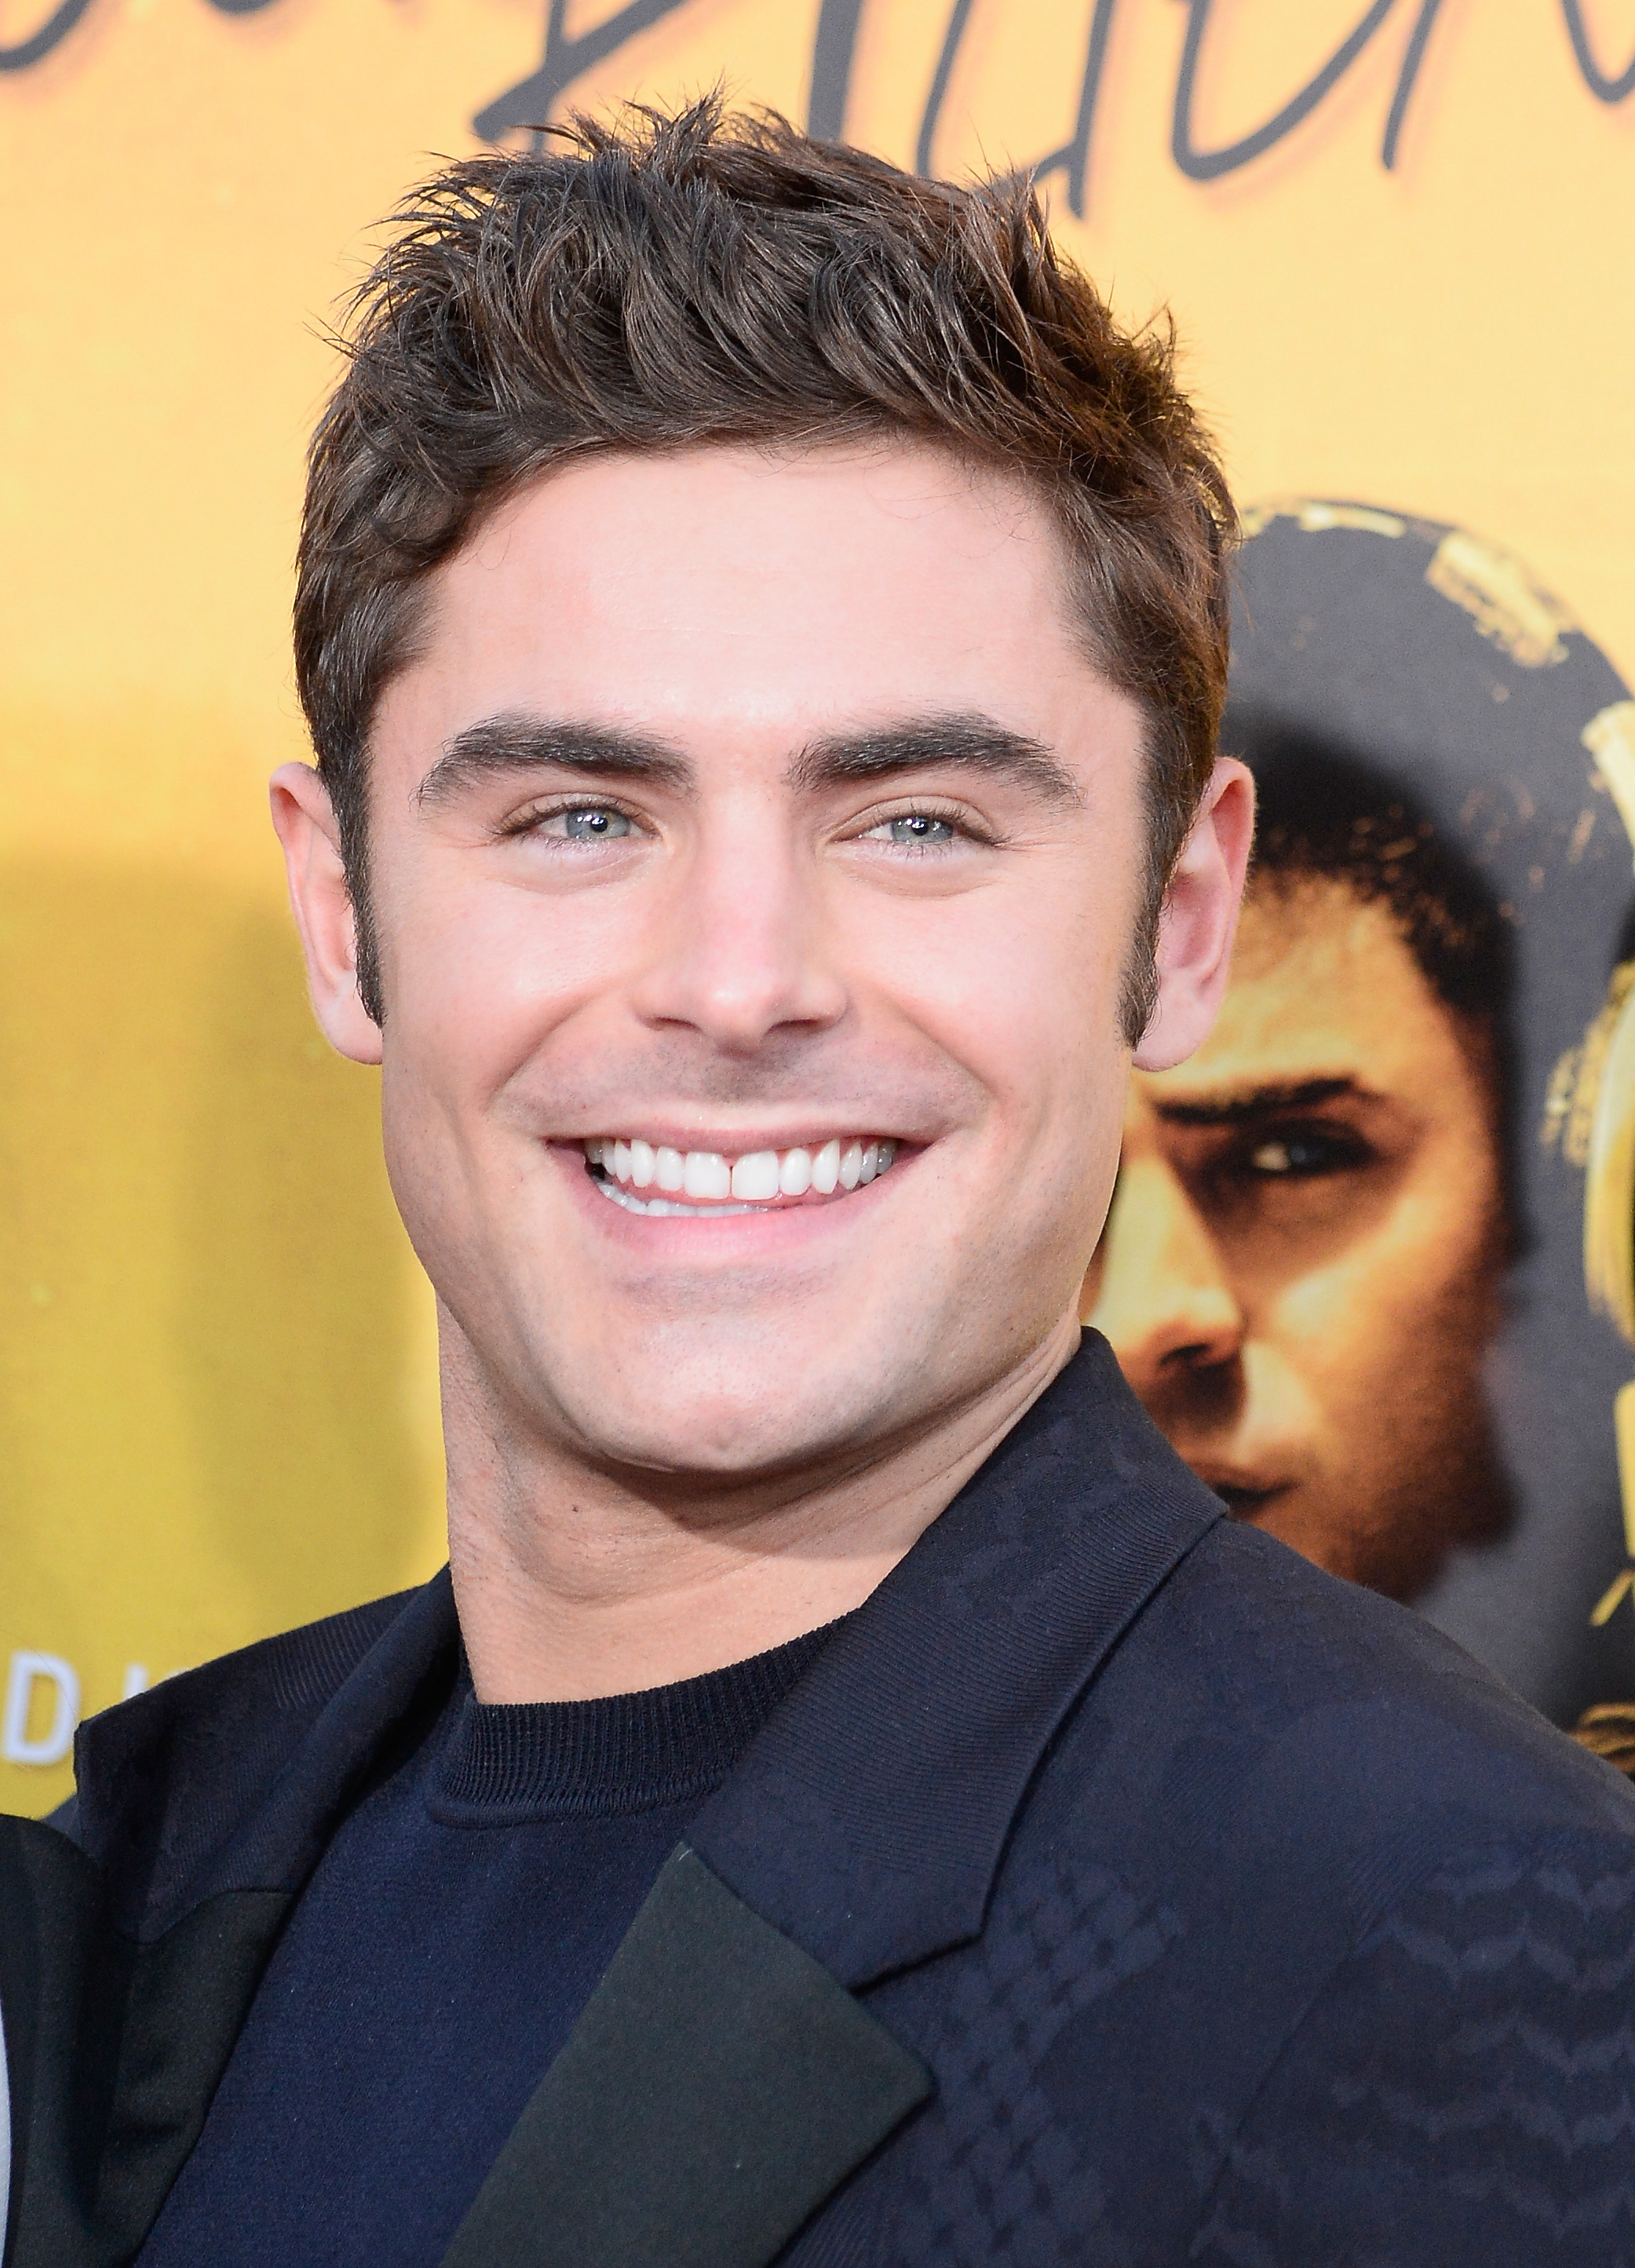 Zac Efron August 20, 2015, in Hollywood, California. | Source: Getty Images